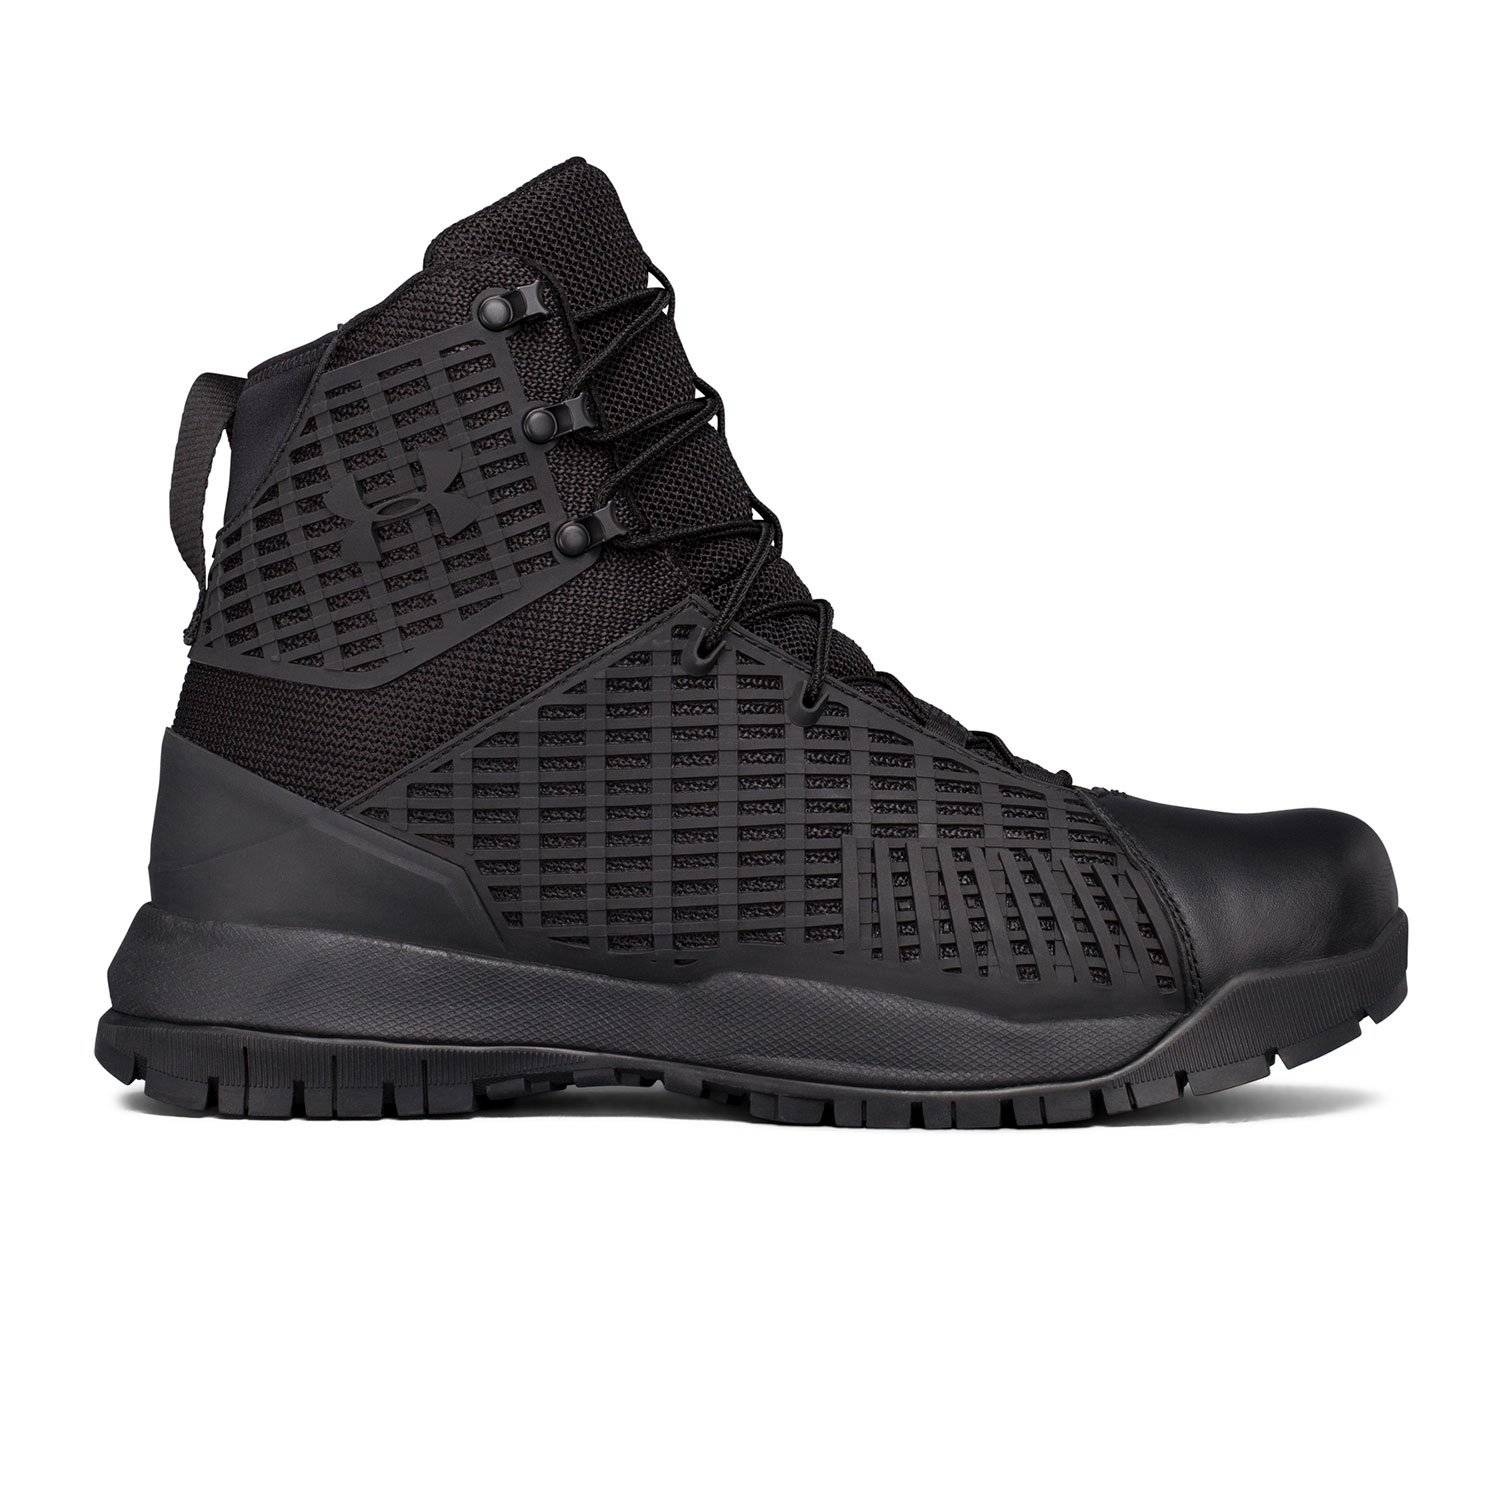 under armour duty boots with zipper